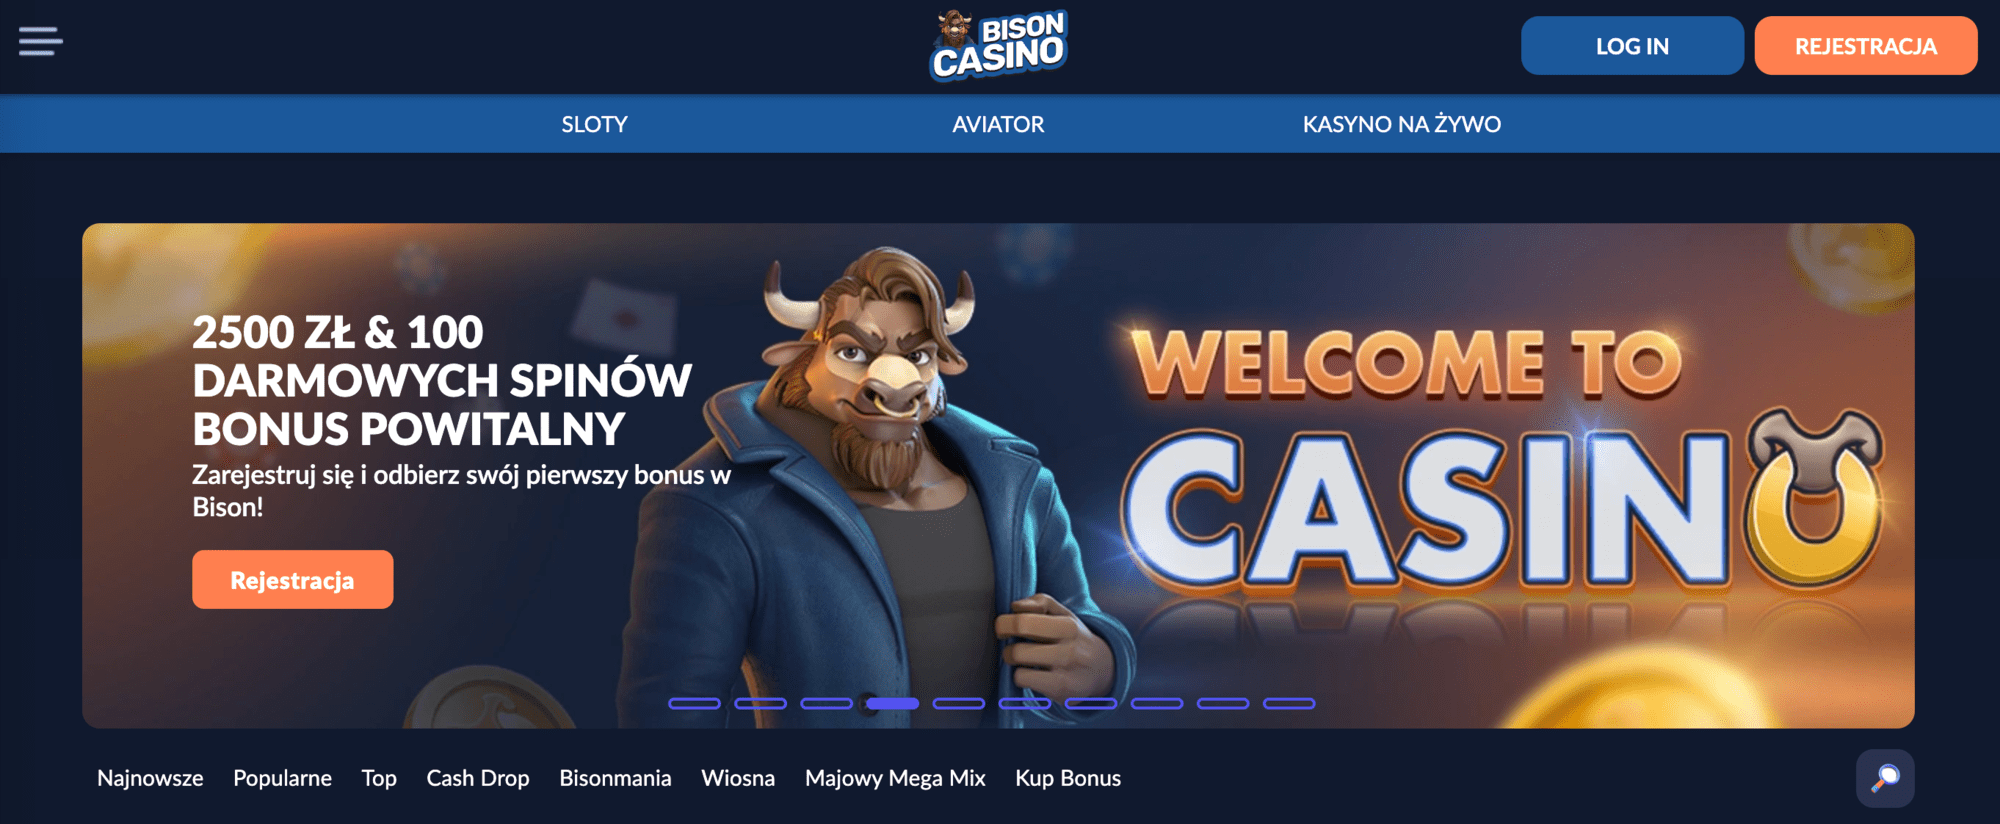 Bison home page